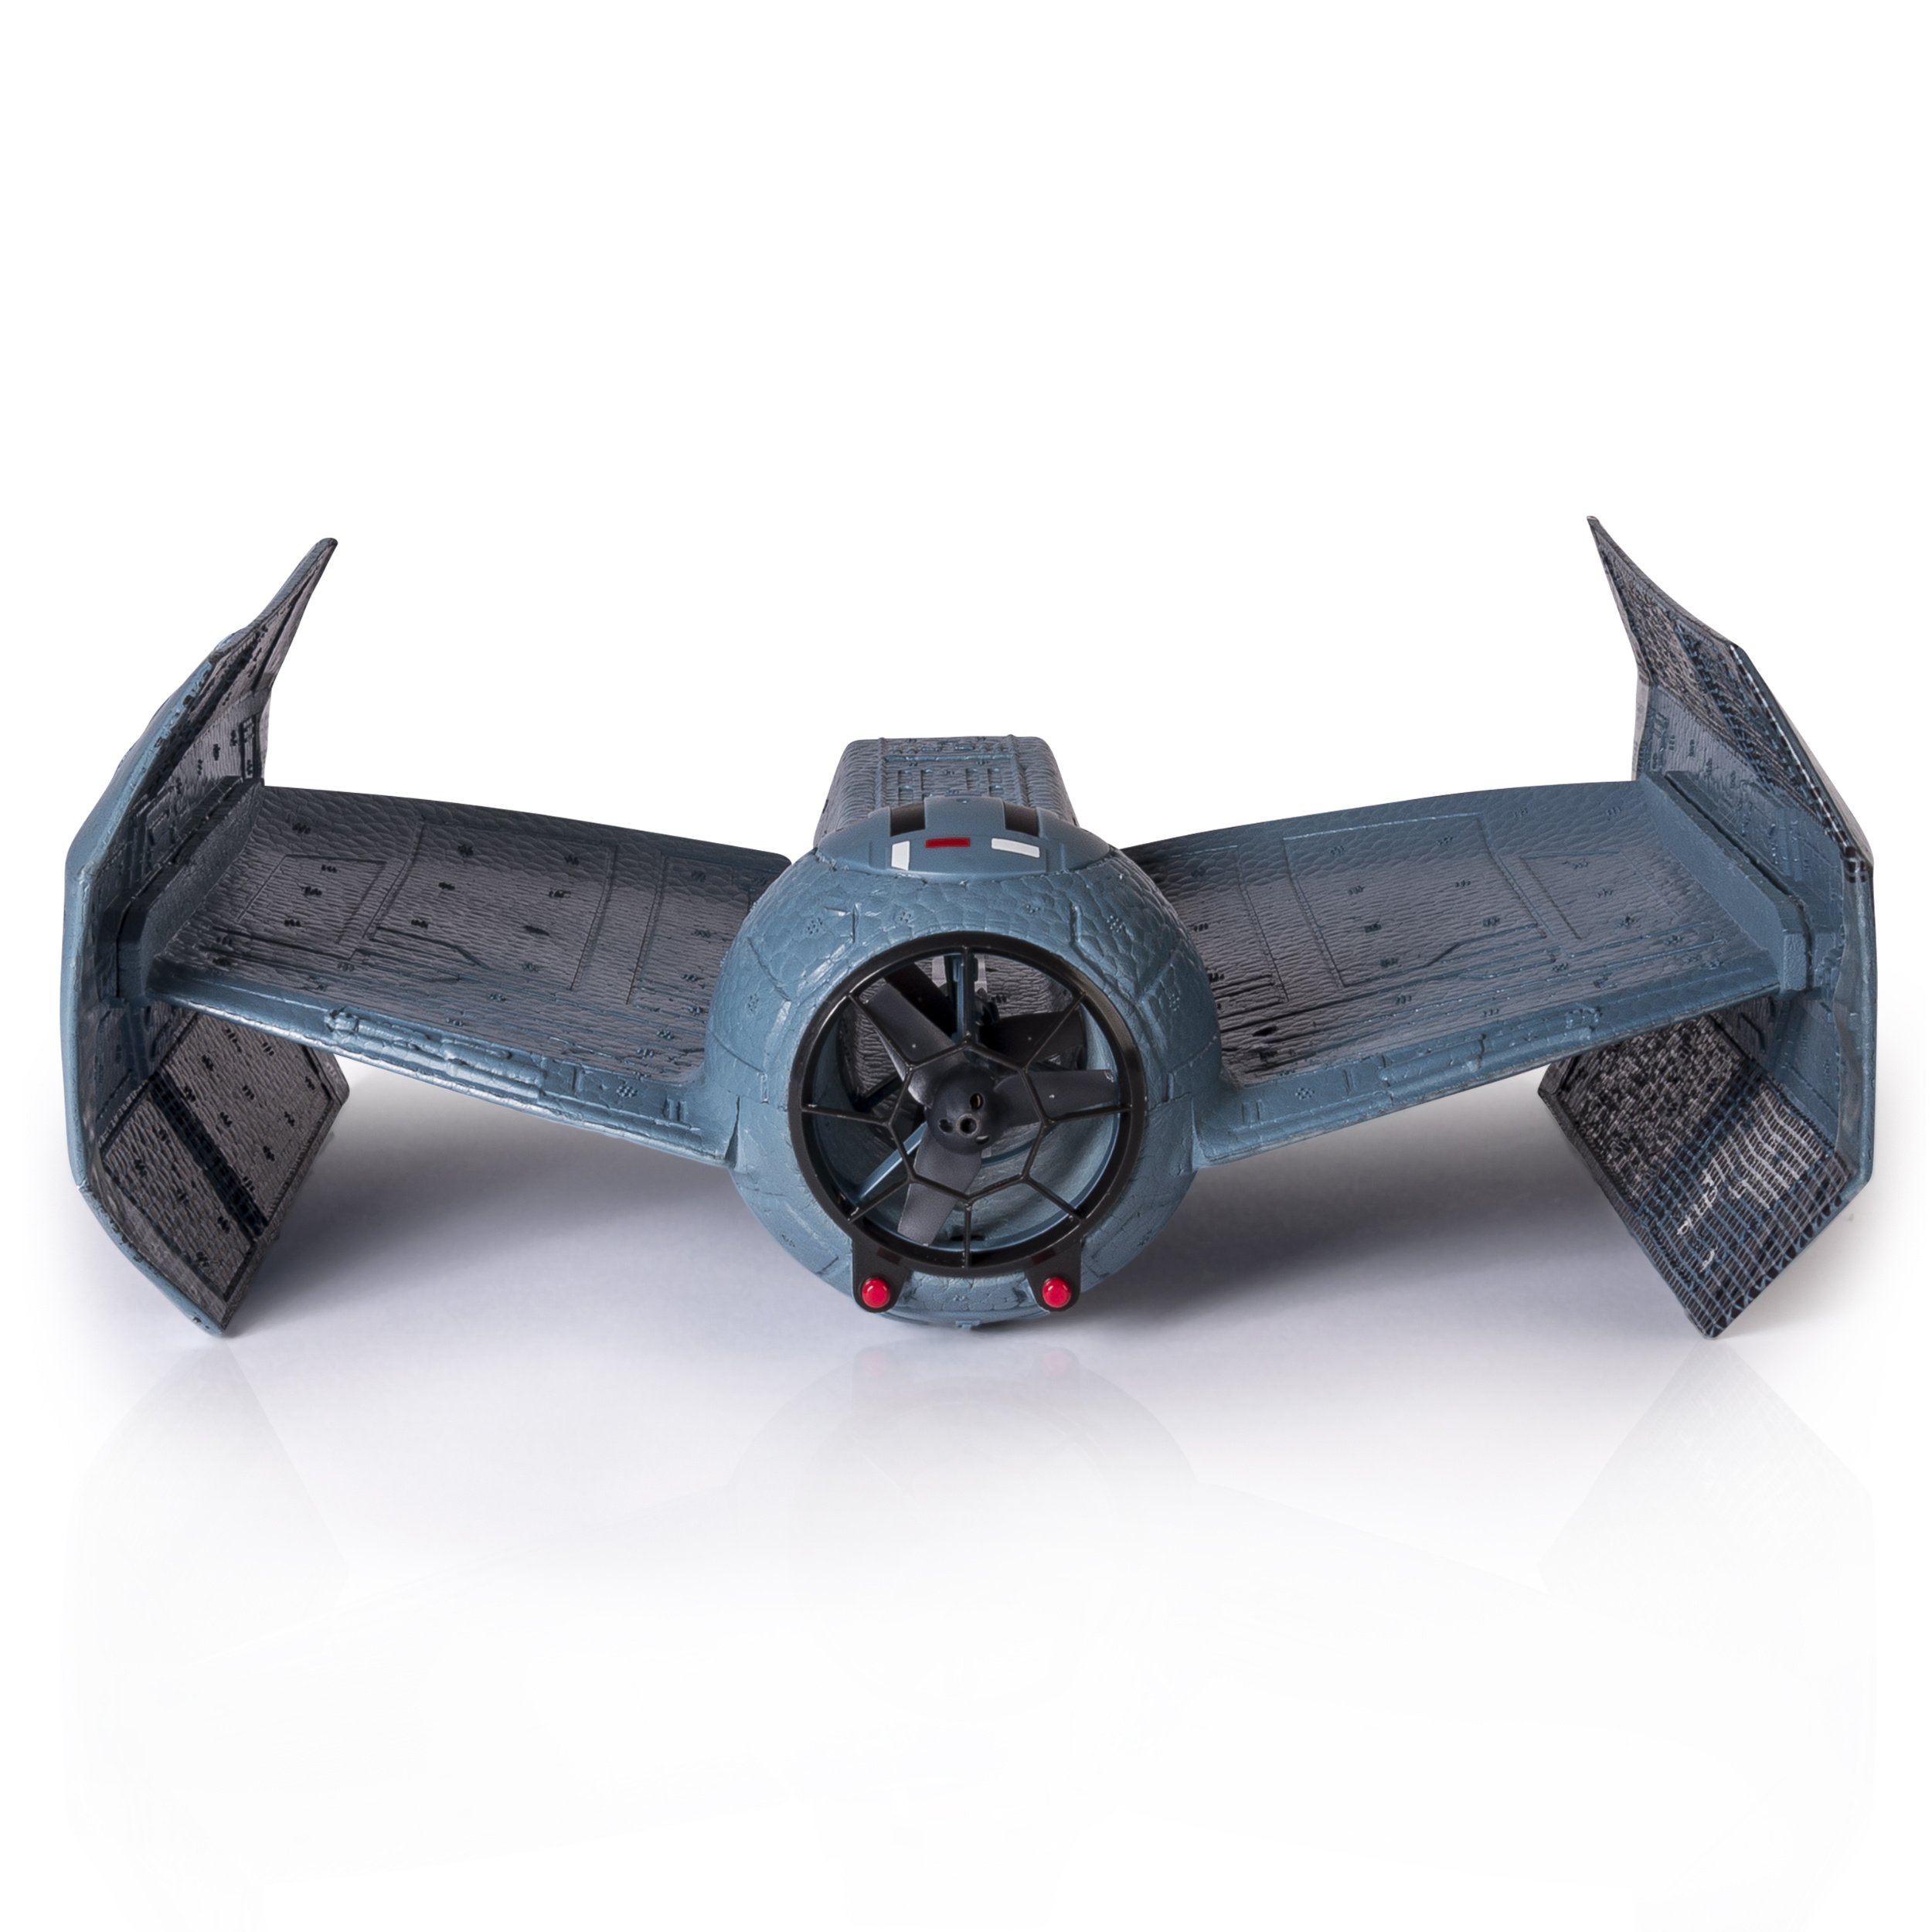 Air Hogs Star Wars Rouge1 Tie Fighter Advance Vehicle